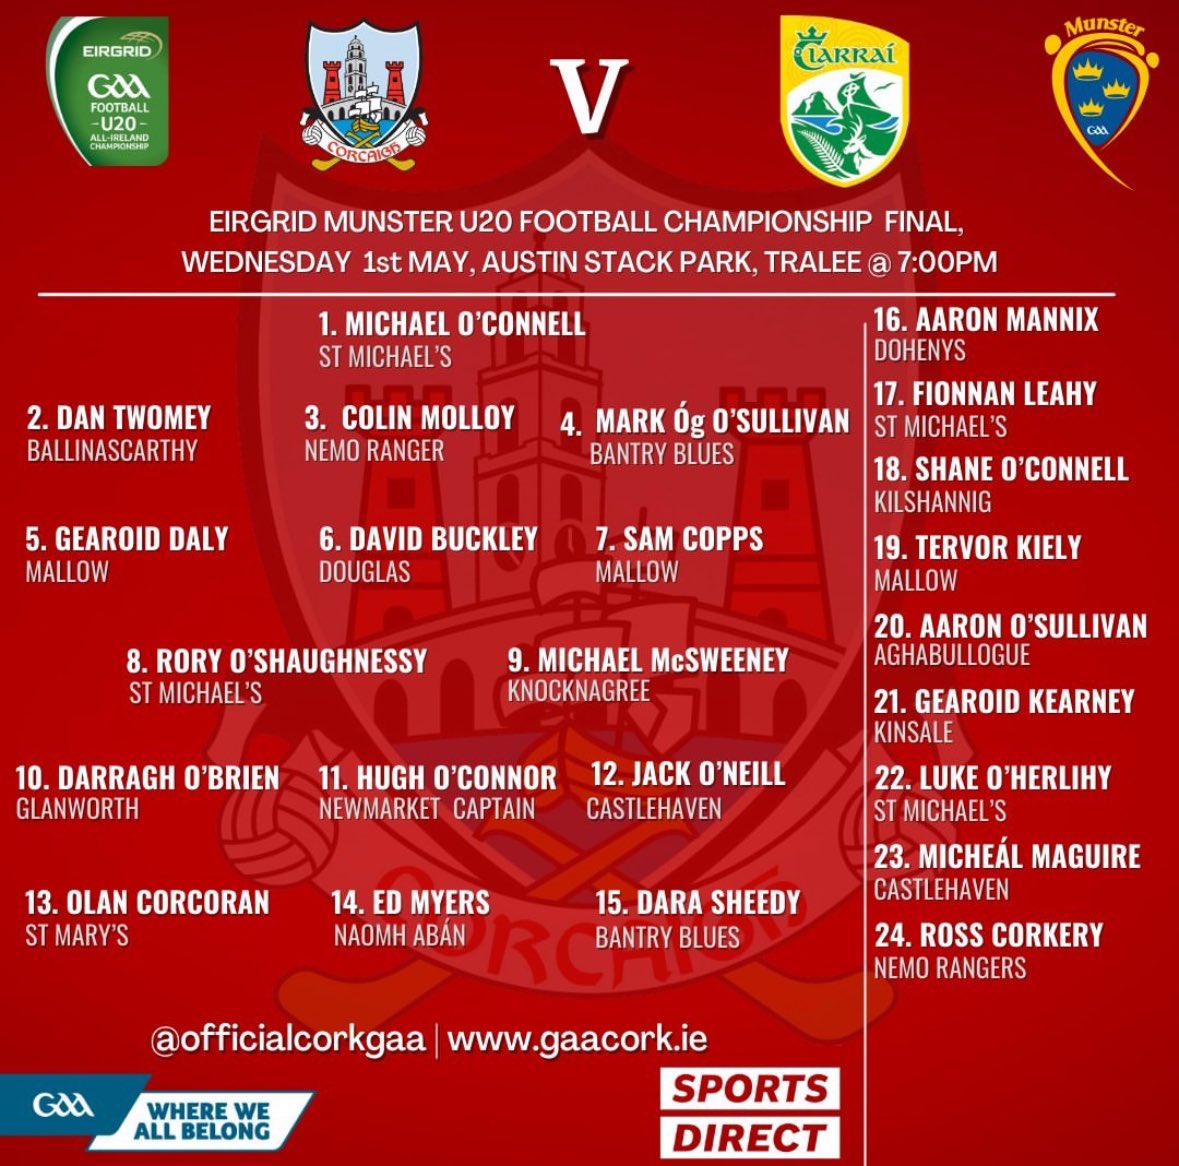 All the best to our own Jack O Neill & Micheál Maguire and the Cork u20 team vs Kerry in the Munster Final this evening. Game live on TG4 TV